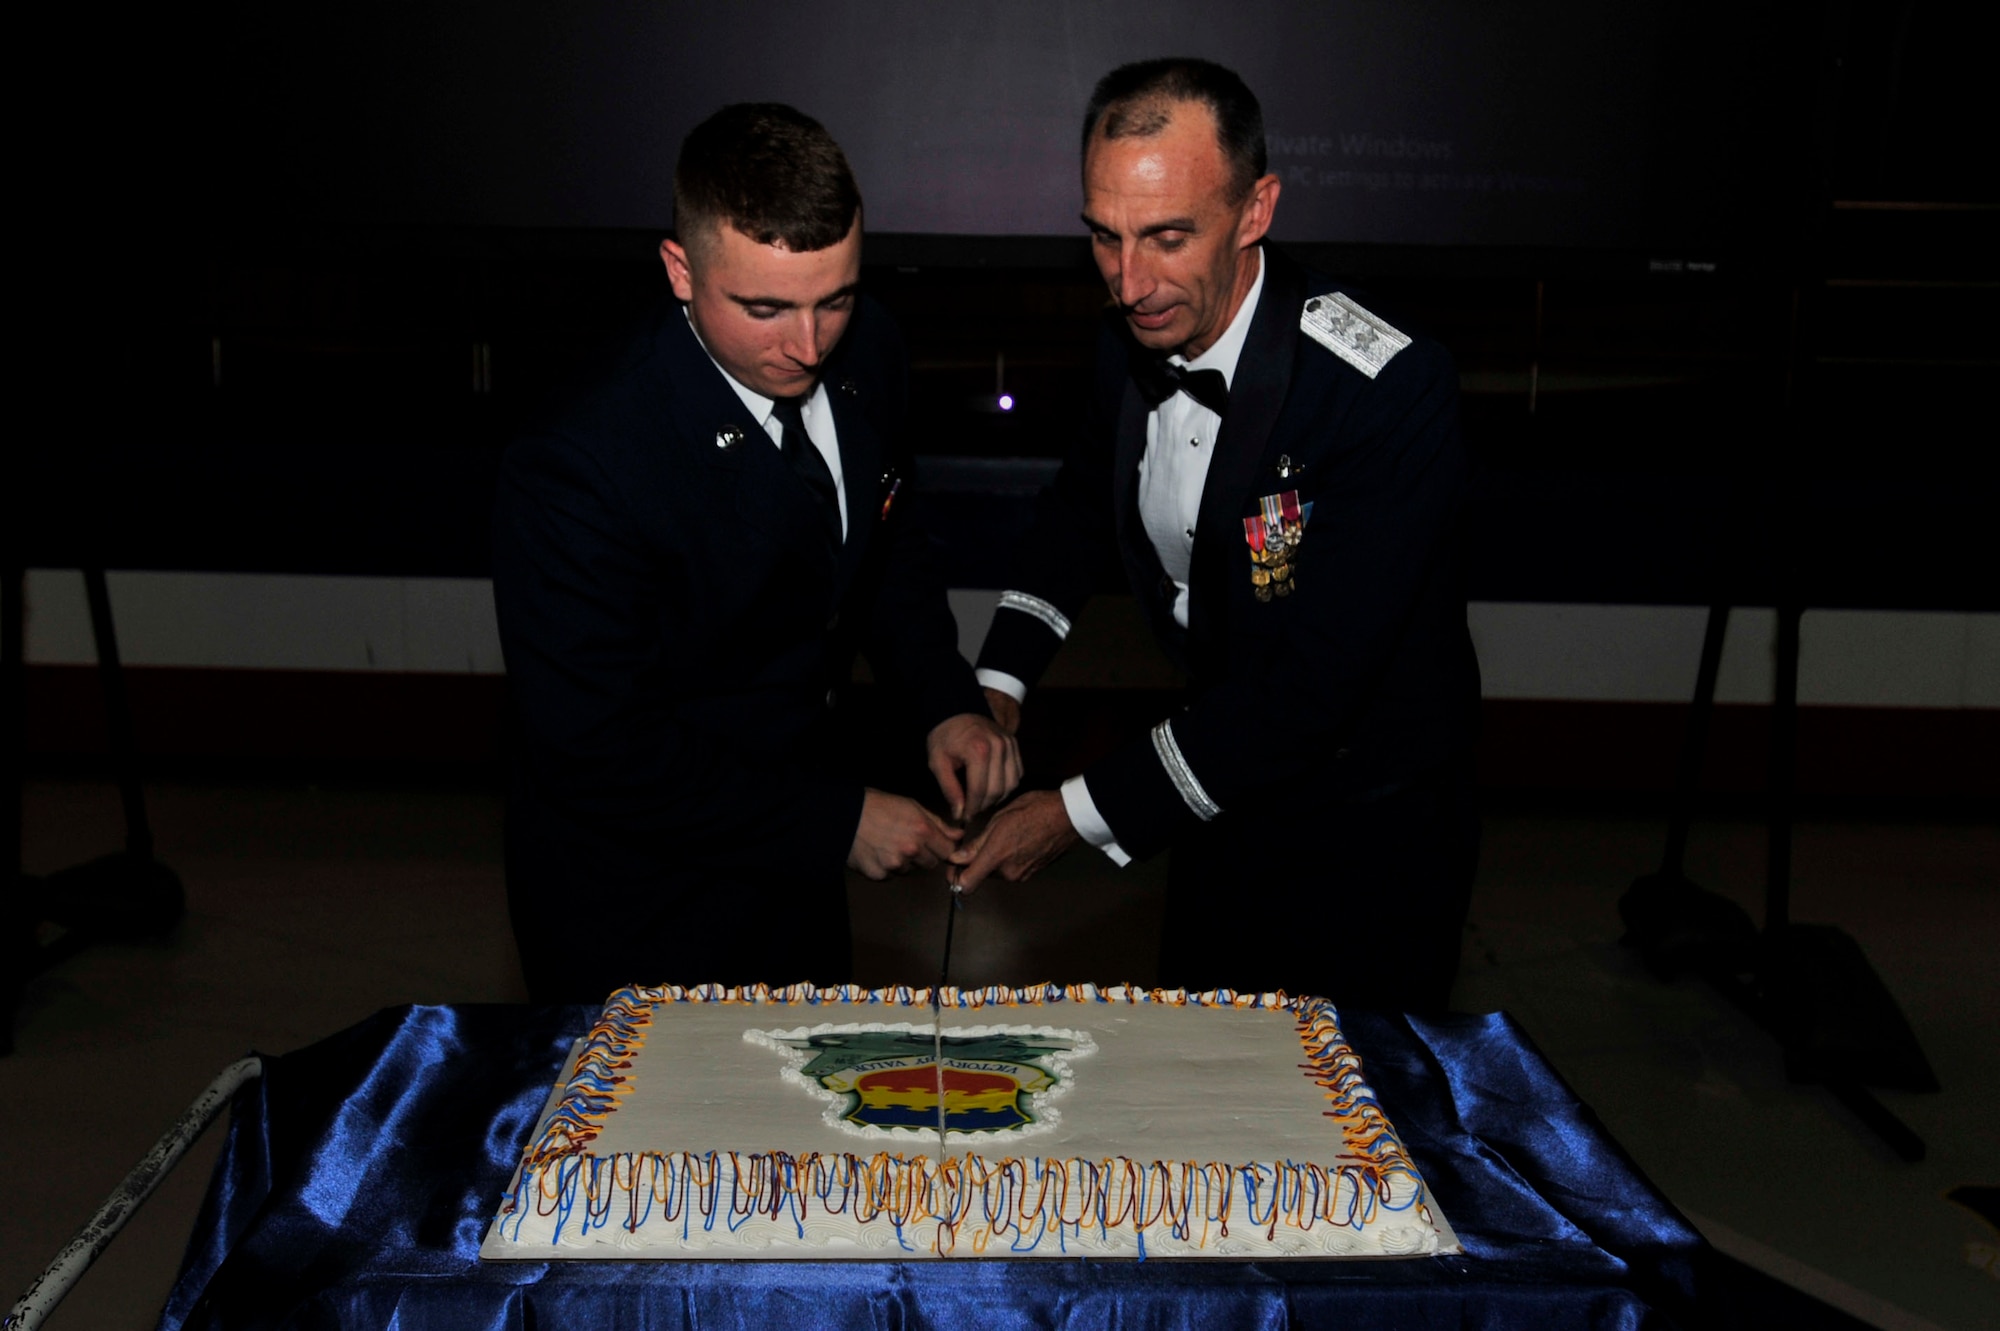 As a time-honored Air Force tradition, the most senior and youngest Airmen on station cut the Air Force Ball cake together.